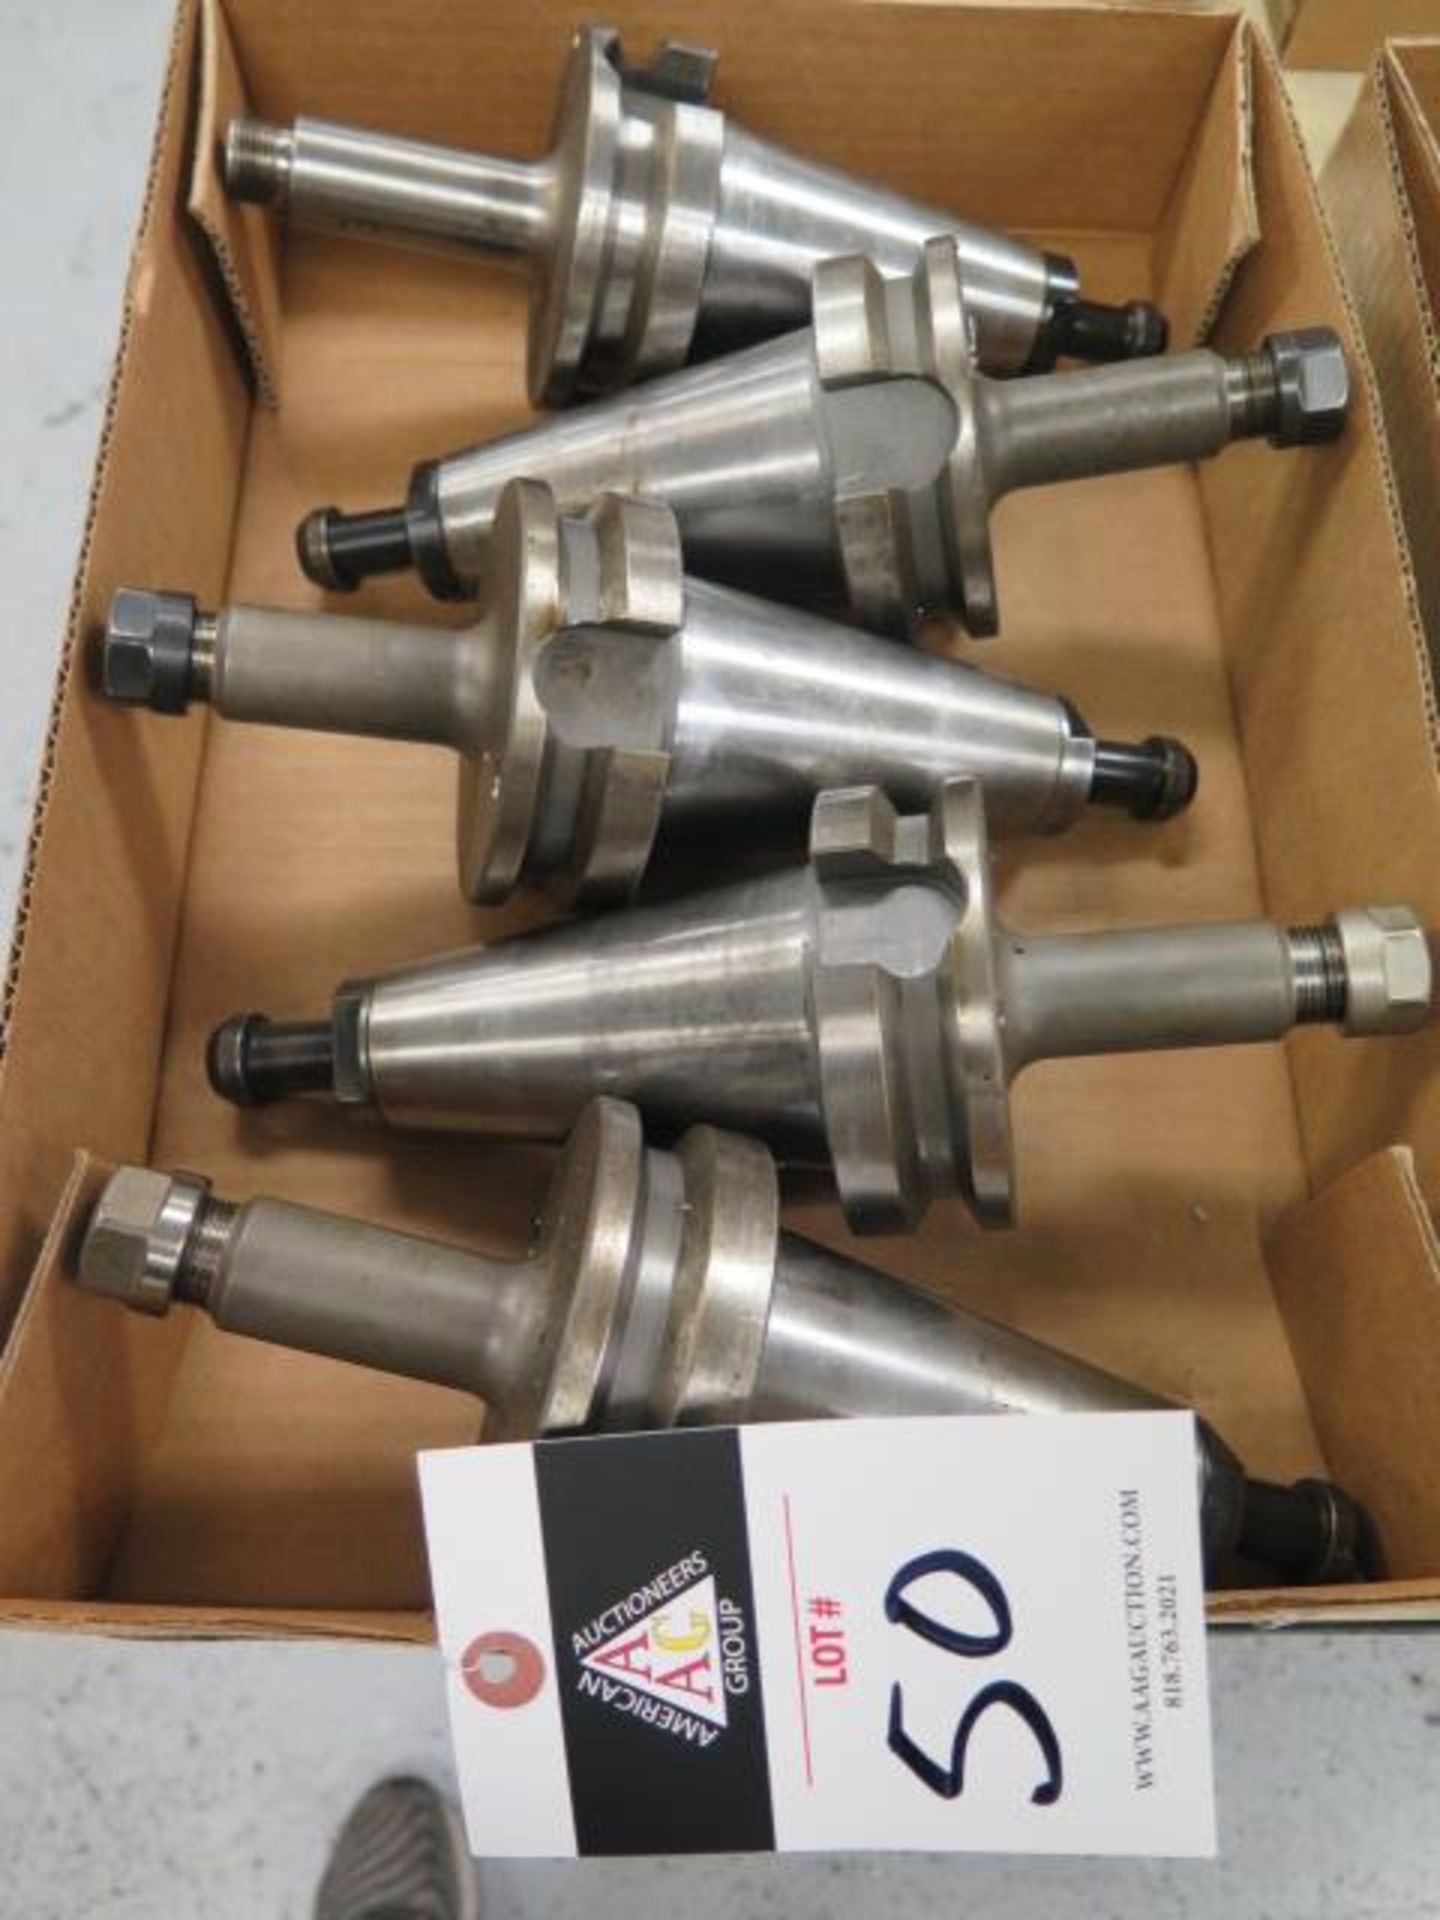 BT-50 Taper ER16 Collet chucks (5) (SOLD AS-IS - NO WARRANTY) (Located @ 2229 Ringwood Ave. San Jose